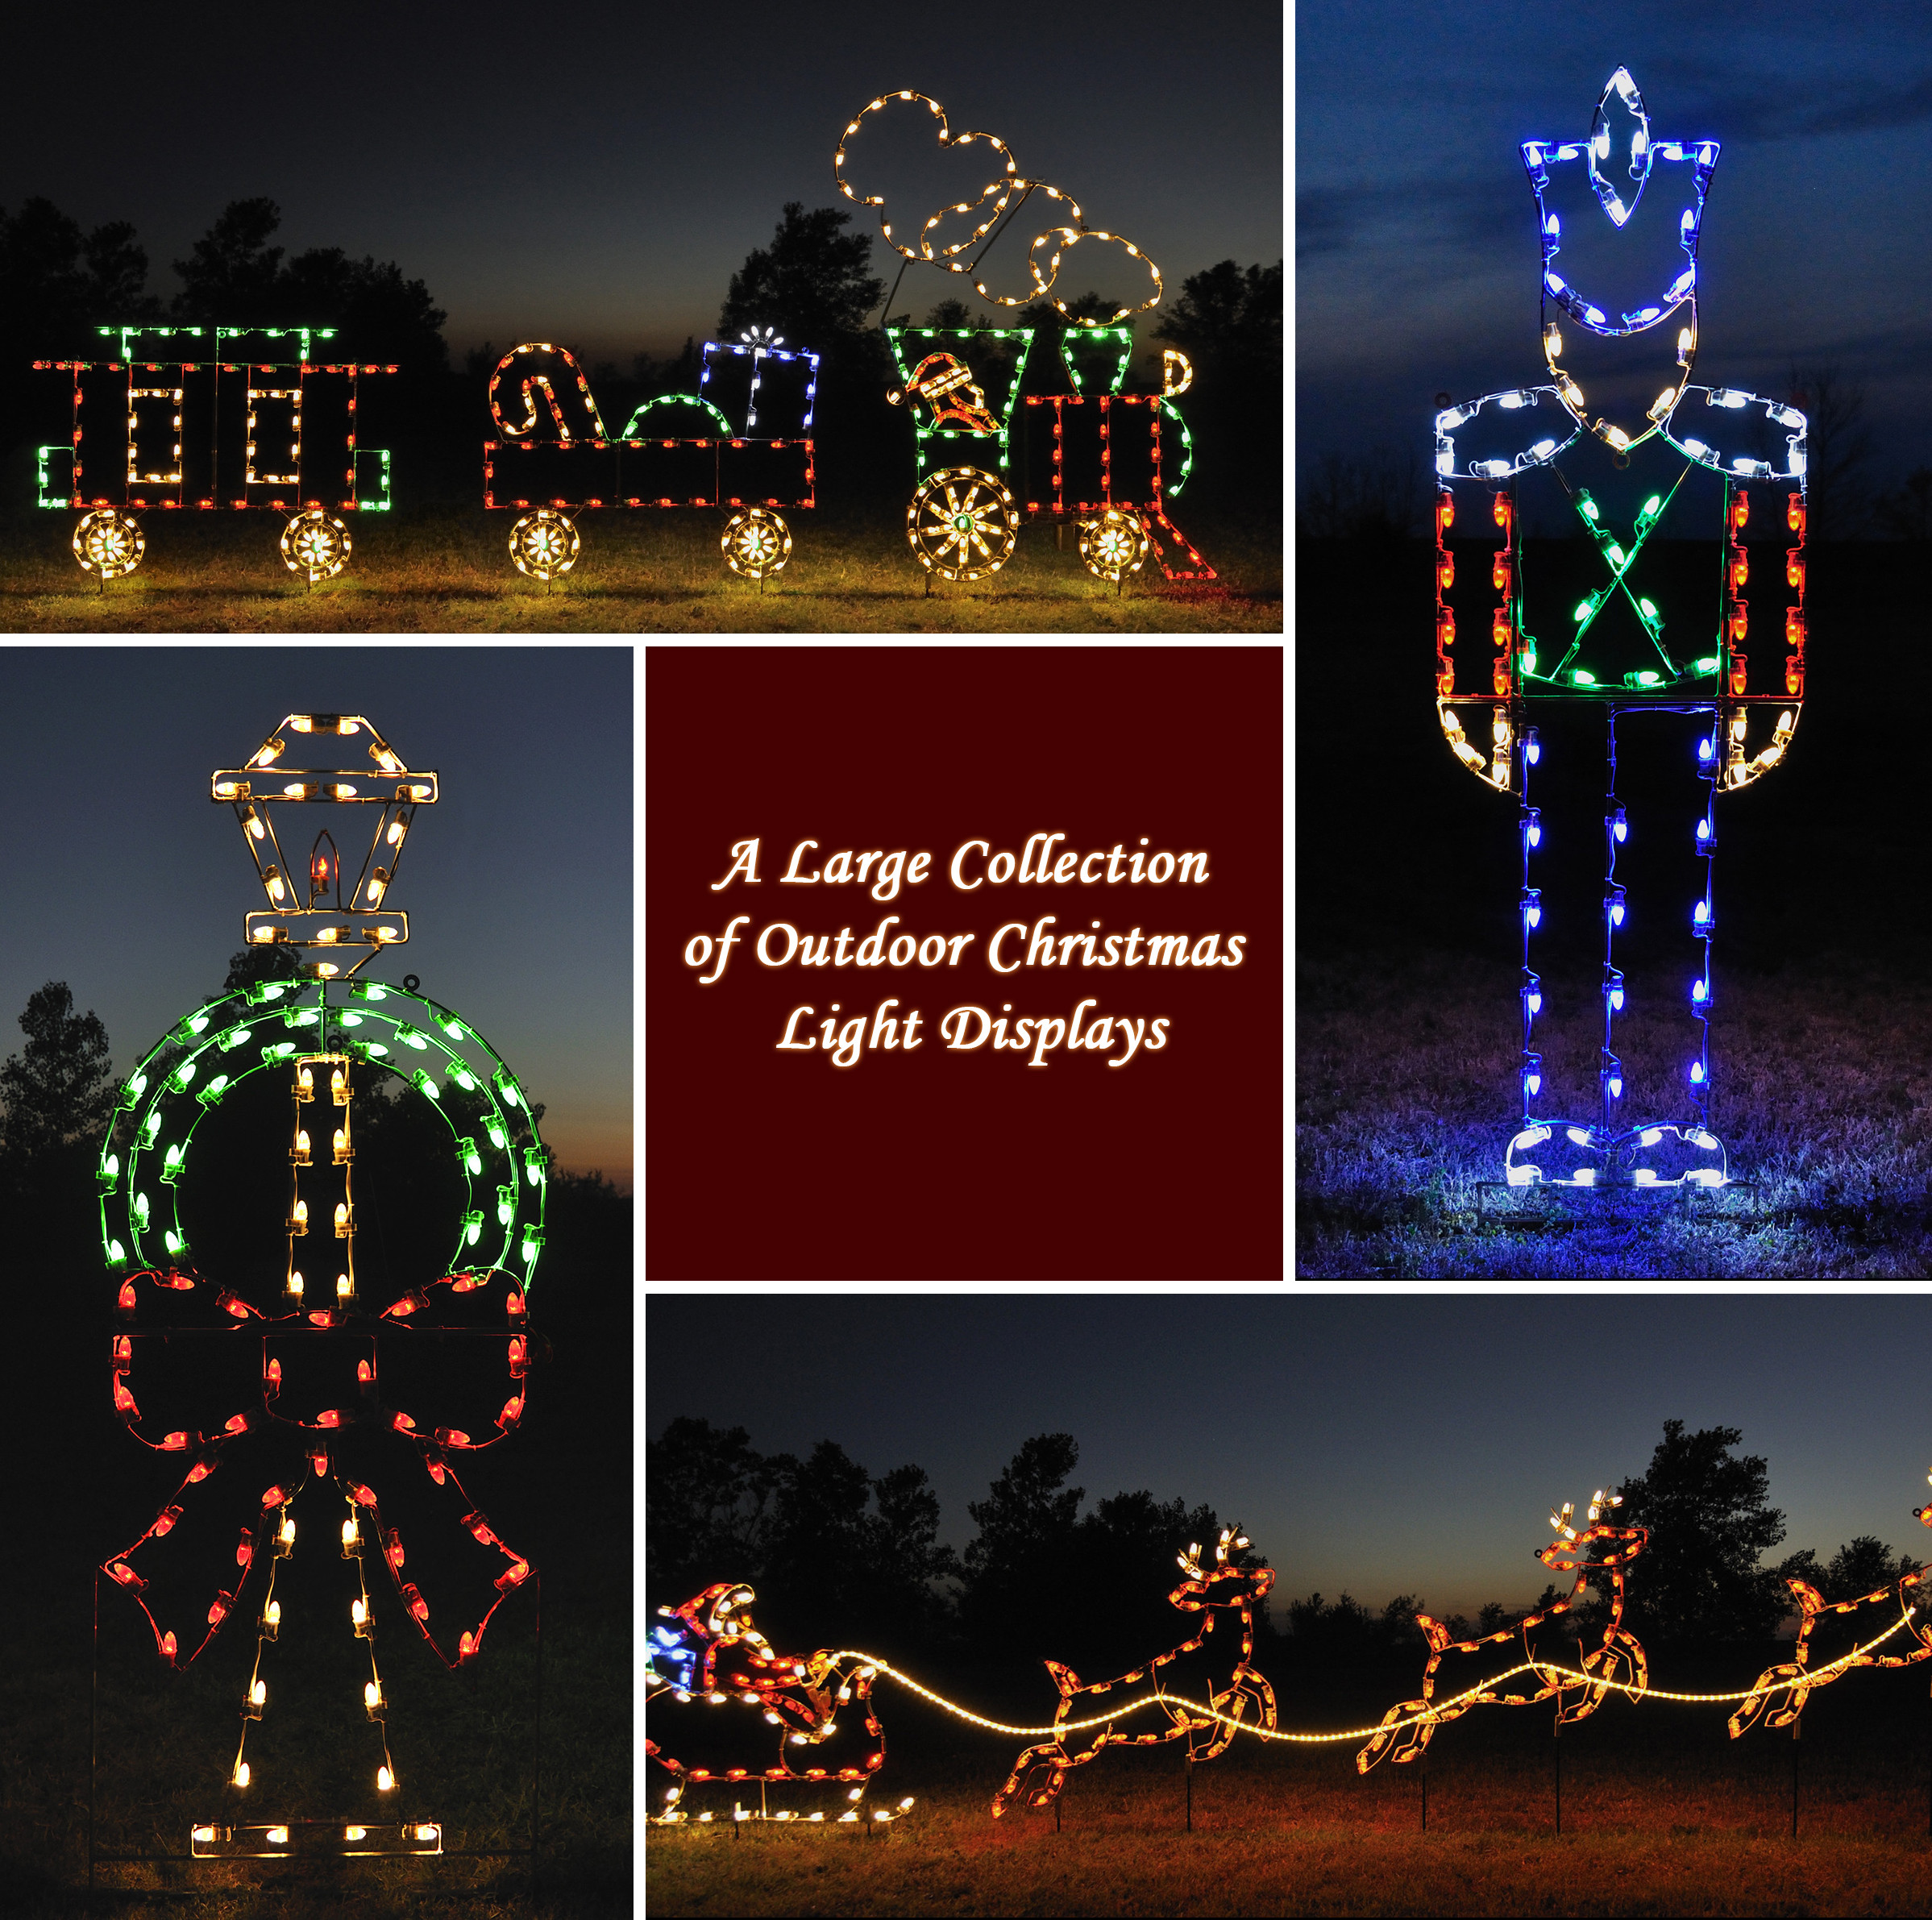 Outdoor Christmas Displays
 A Collection of Outdoor Christmas Light Displays